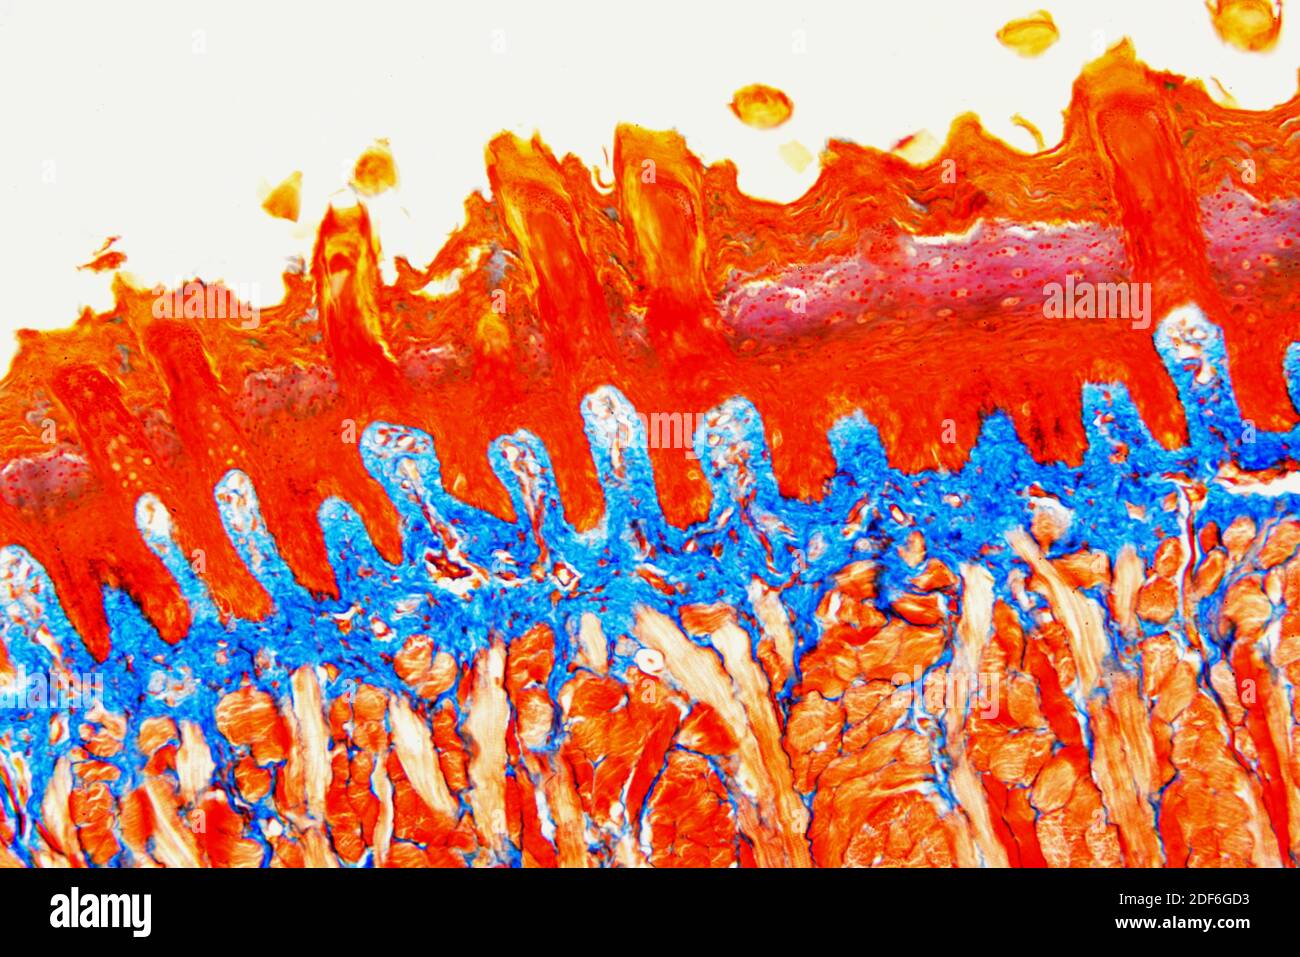 Tongue section showing lingual papillae, taste buds, striated muscles and connective tissue. Optical microscope X100. Stock Photo